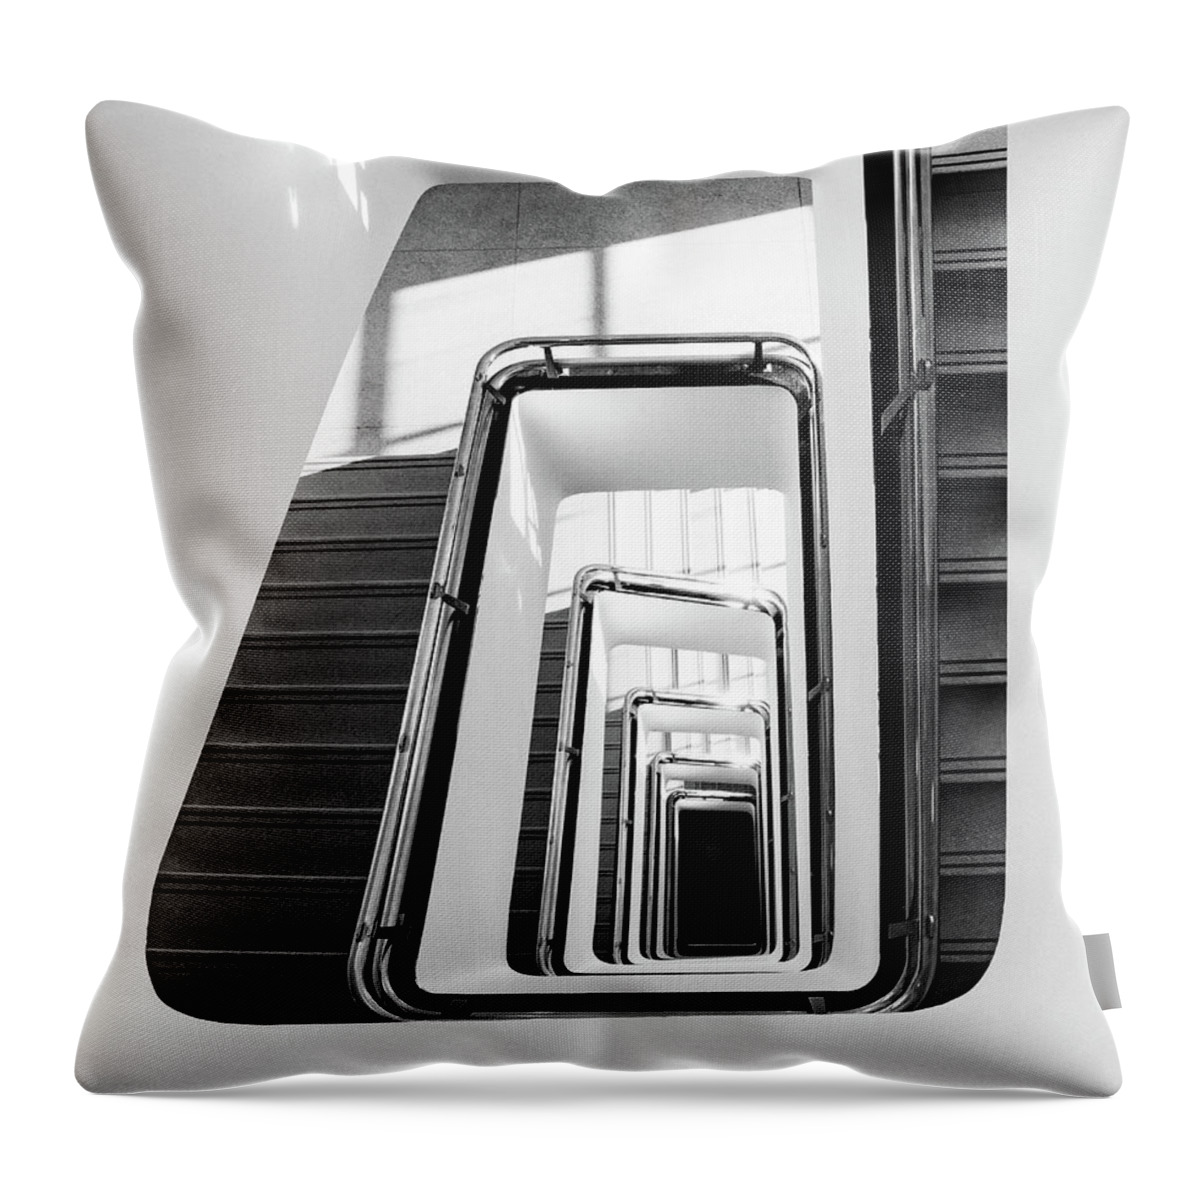 Bm.museum Throw Pillow featuring the photograph Staircase III by Marzena Grabczynska Lorenc